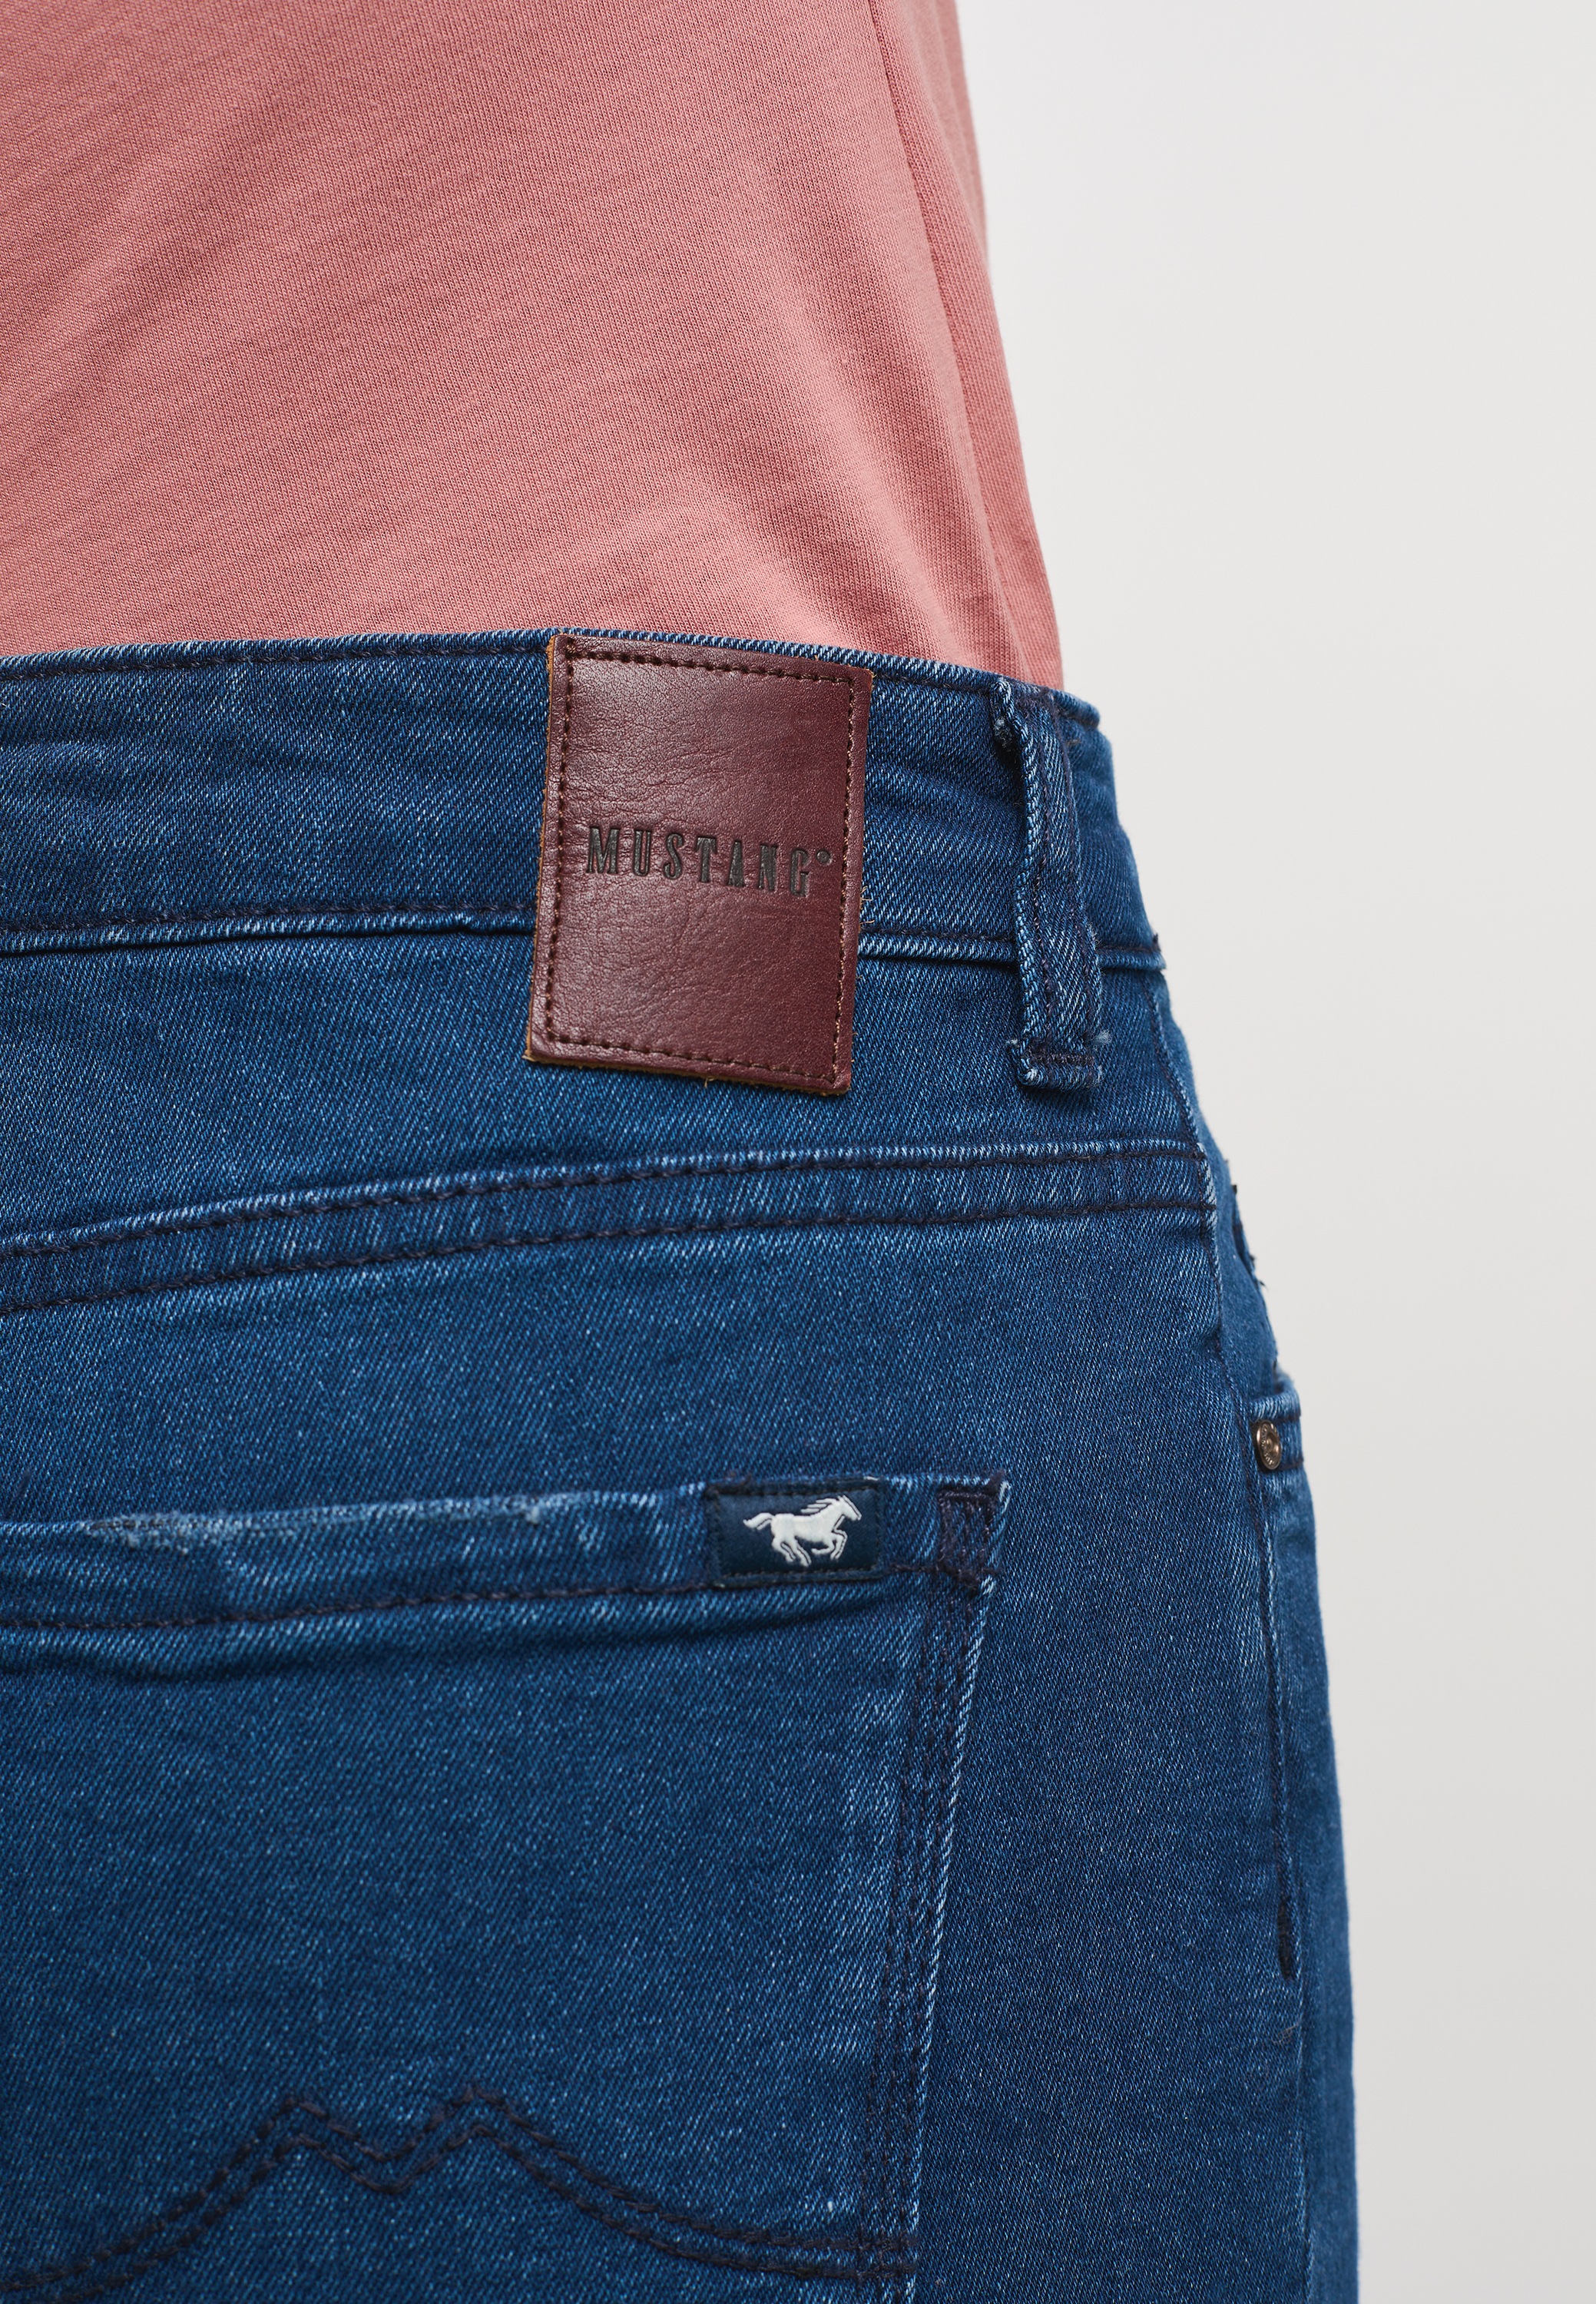 MUSTANG 5-Pocket-Jeans »Mustang Hose Relaxed Style Crosby Slim«, Mustang Crosby bestellen Style Relaxed Slim